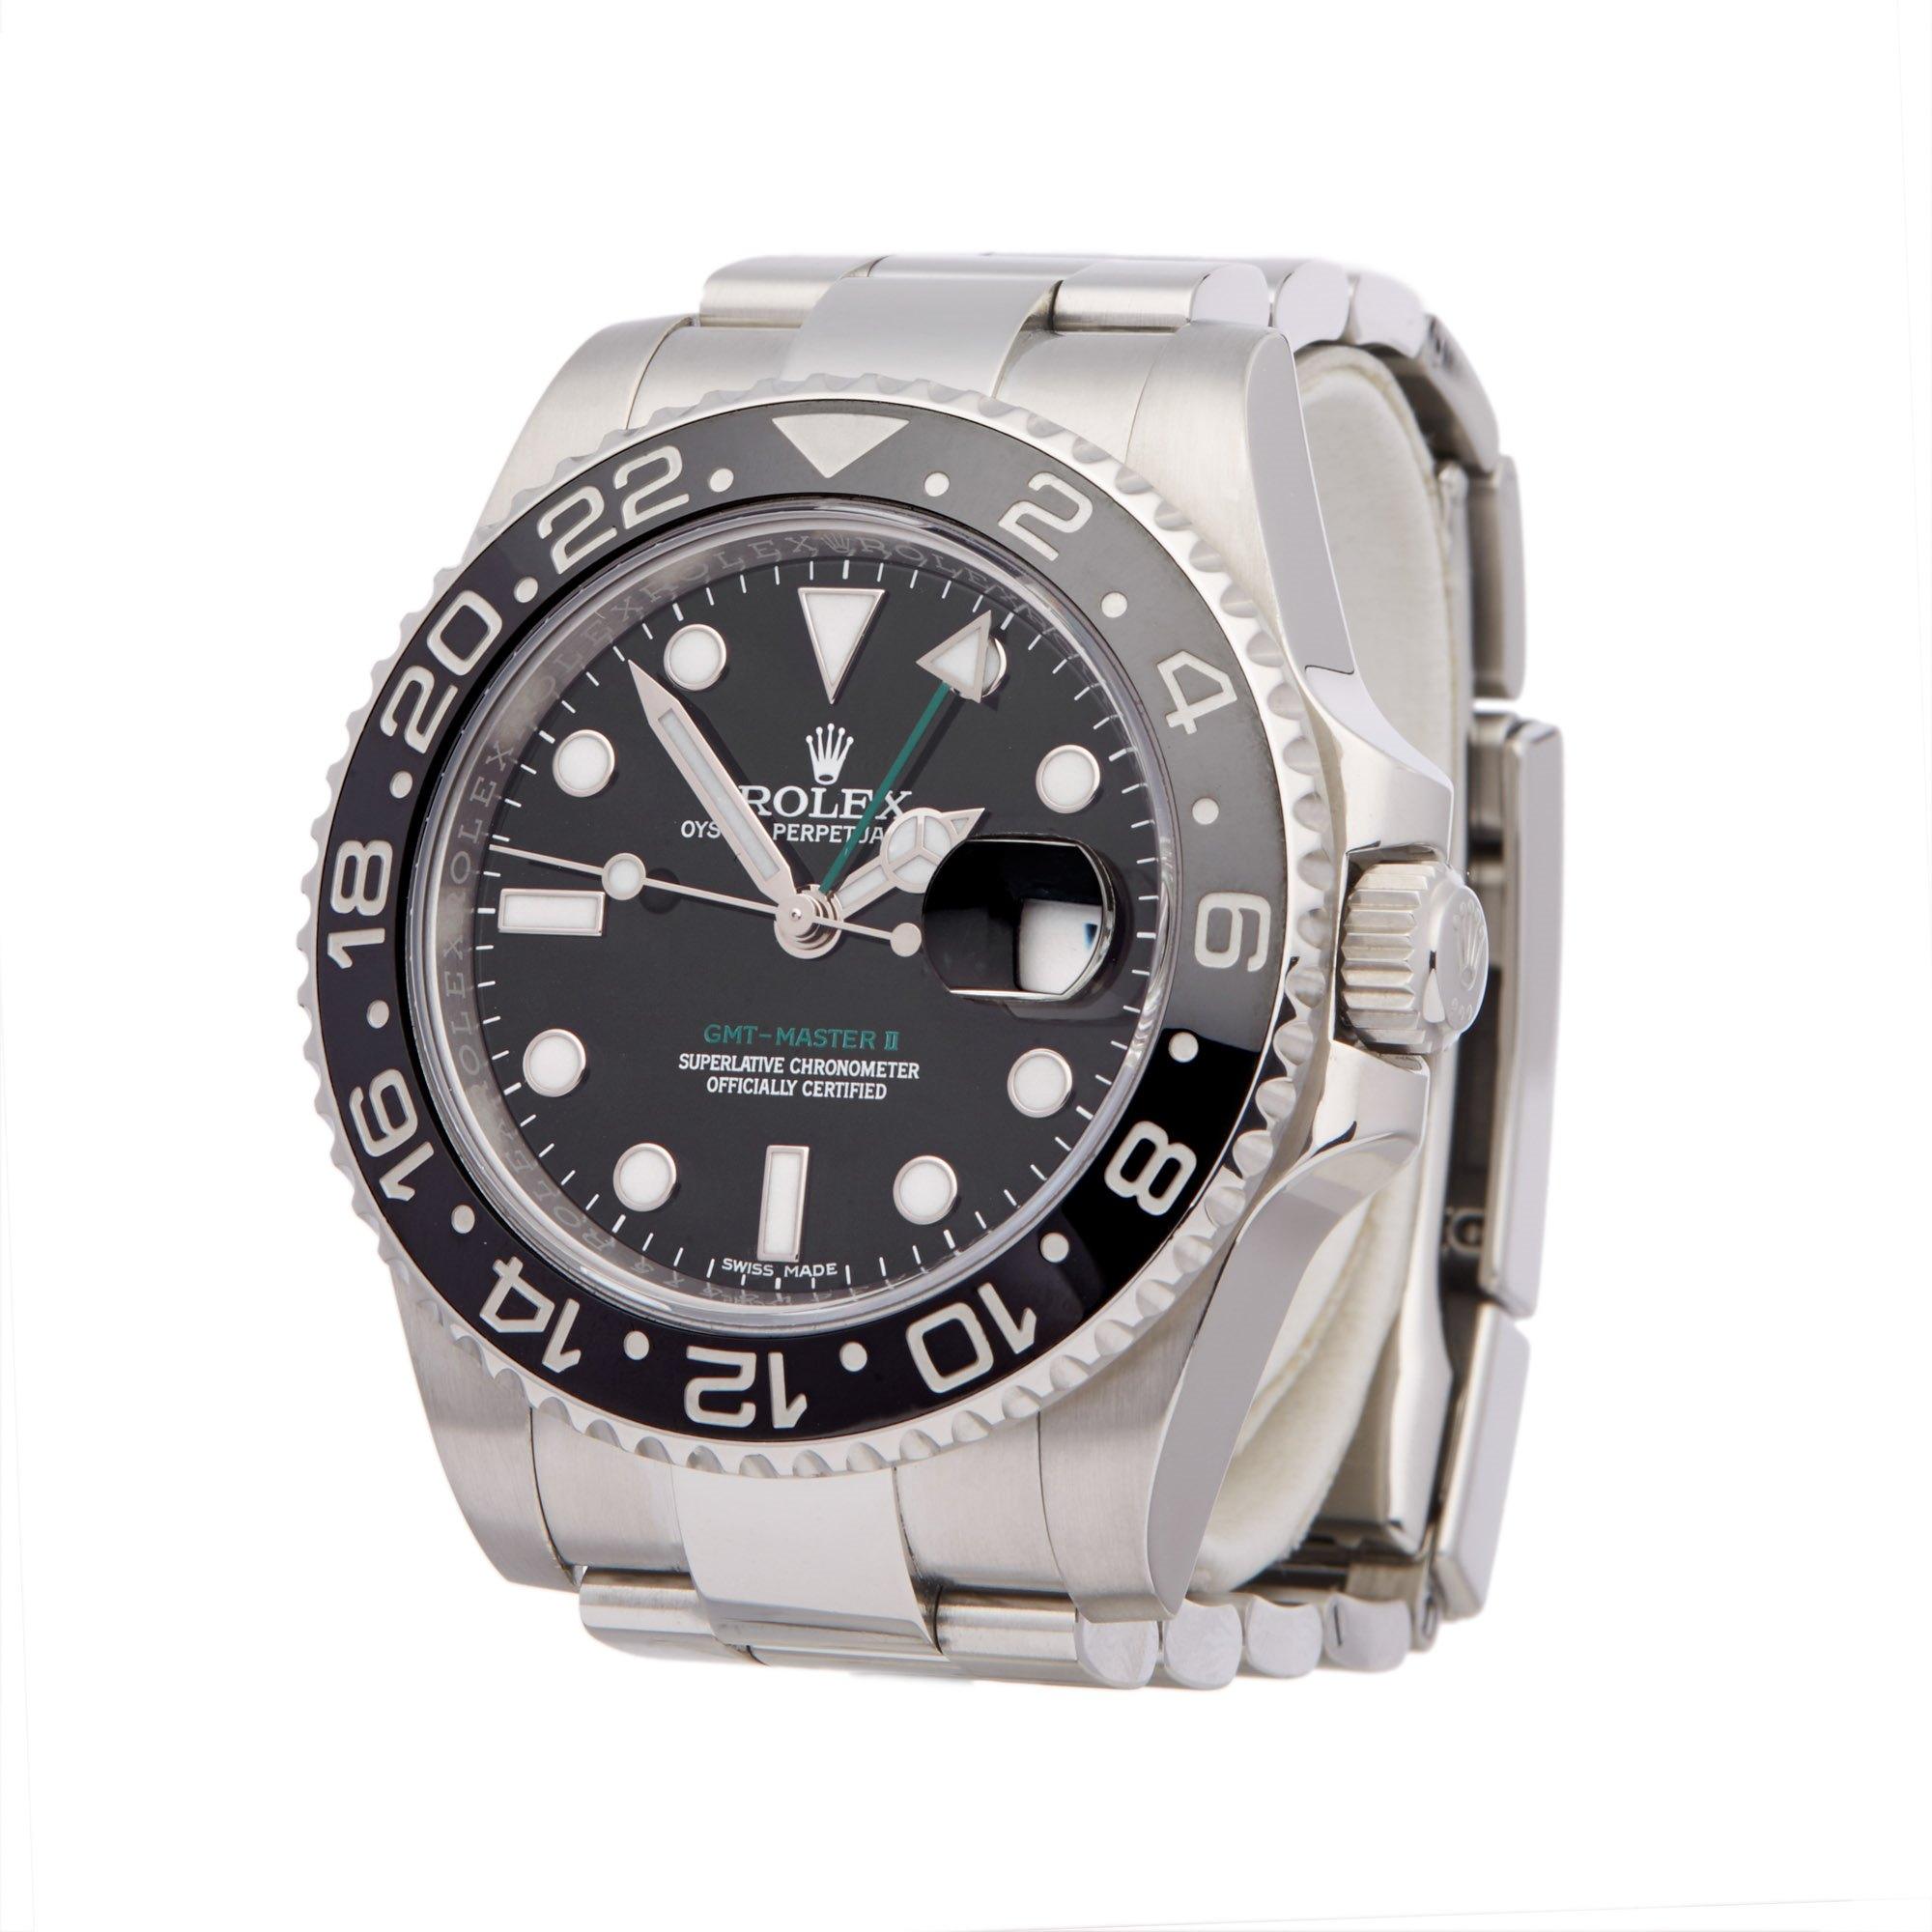 Xupes Reference: W007213
Manufacturer: Rolex
Model: GMT-Master II
Model Variant: 
Model Number: 116710LN
Age: 03-12-2015
Gender: Men's
Complete With: Rolex Box, Manuals, Guarantee & Swing Tags 
Dial: Black Other
Glass: Sapphire Crystal
Case Size: